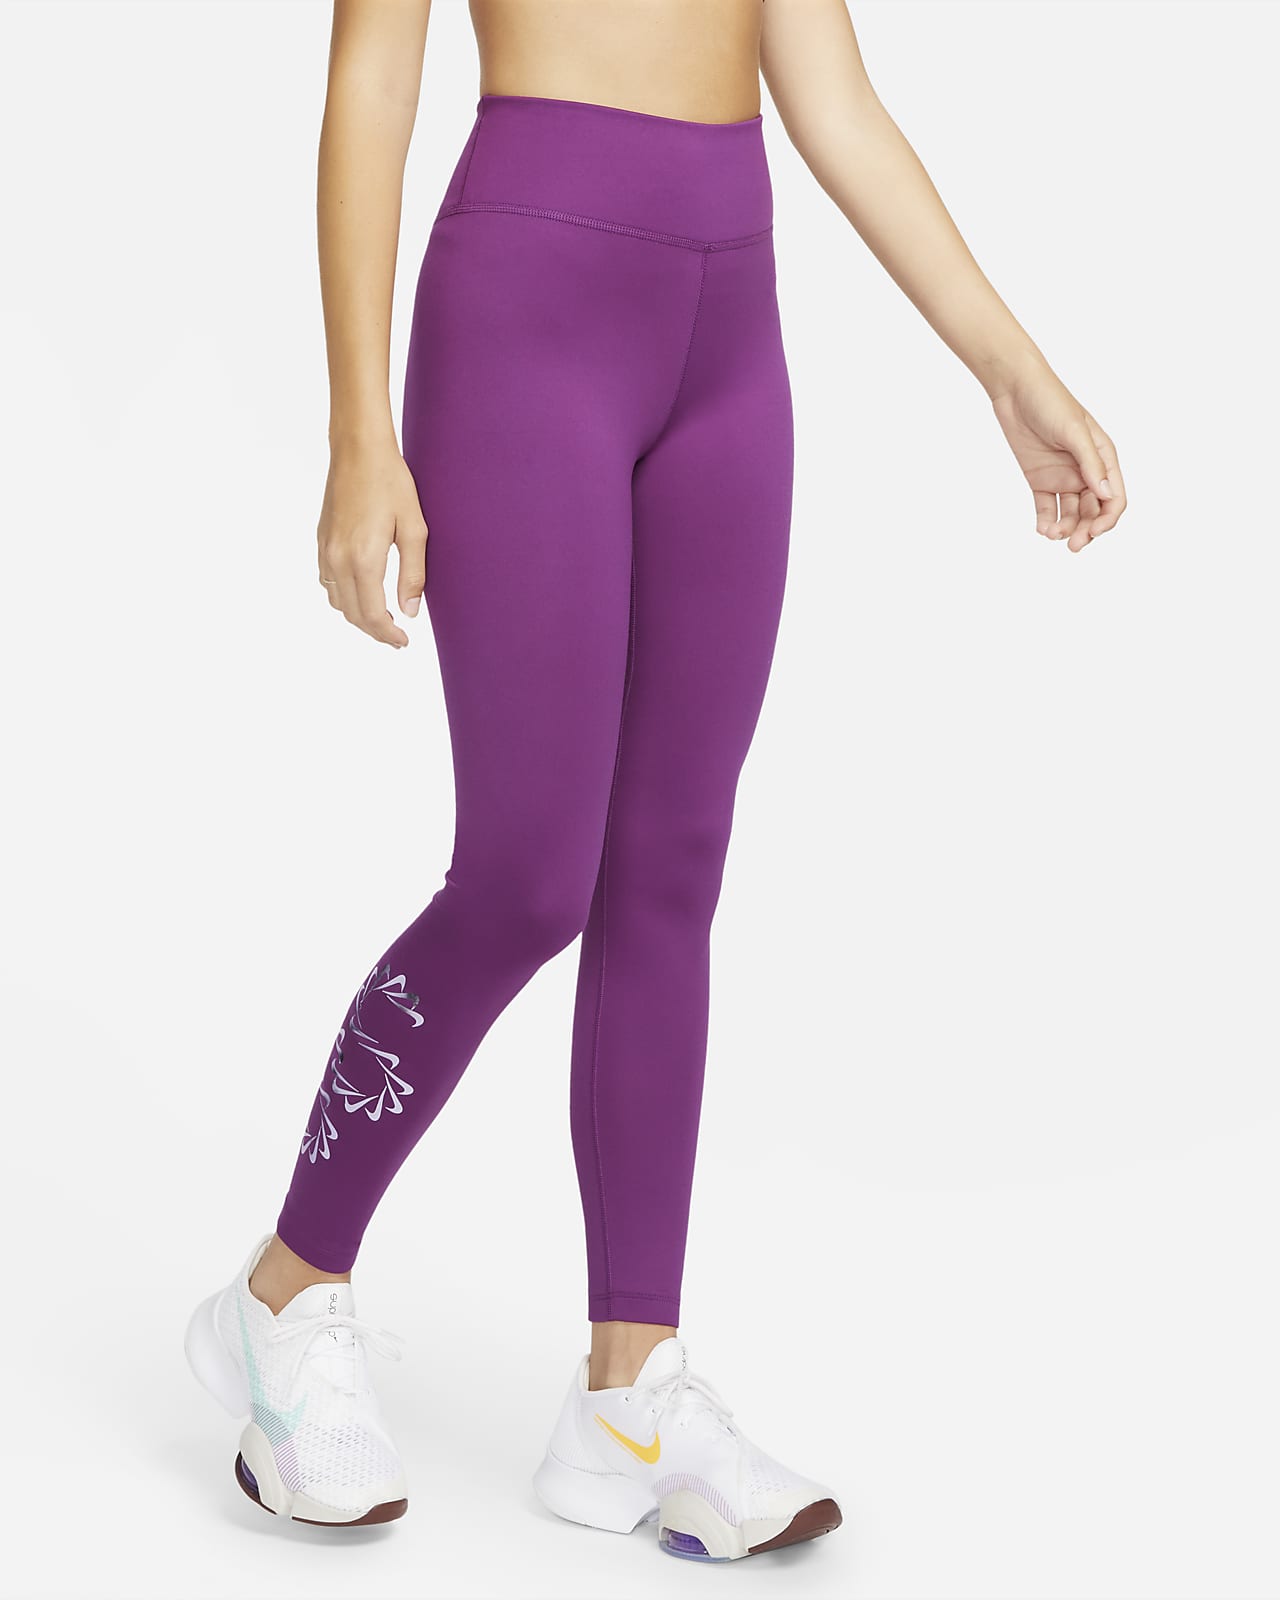 Therma-FIT Women's Mid-Rise Graphic Training Nike.com